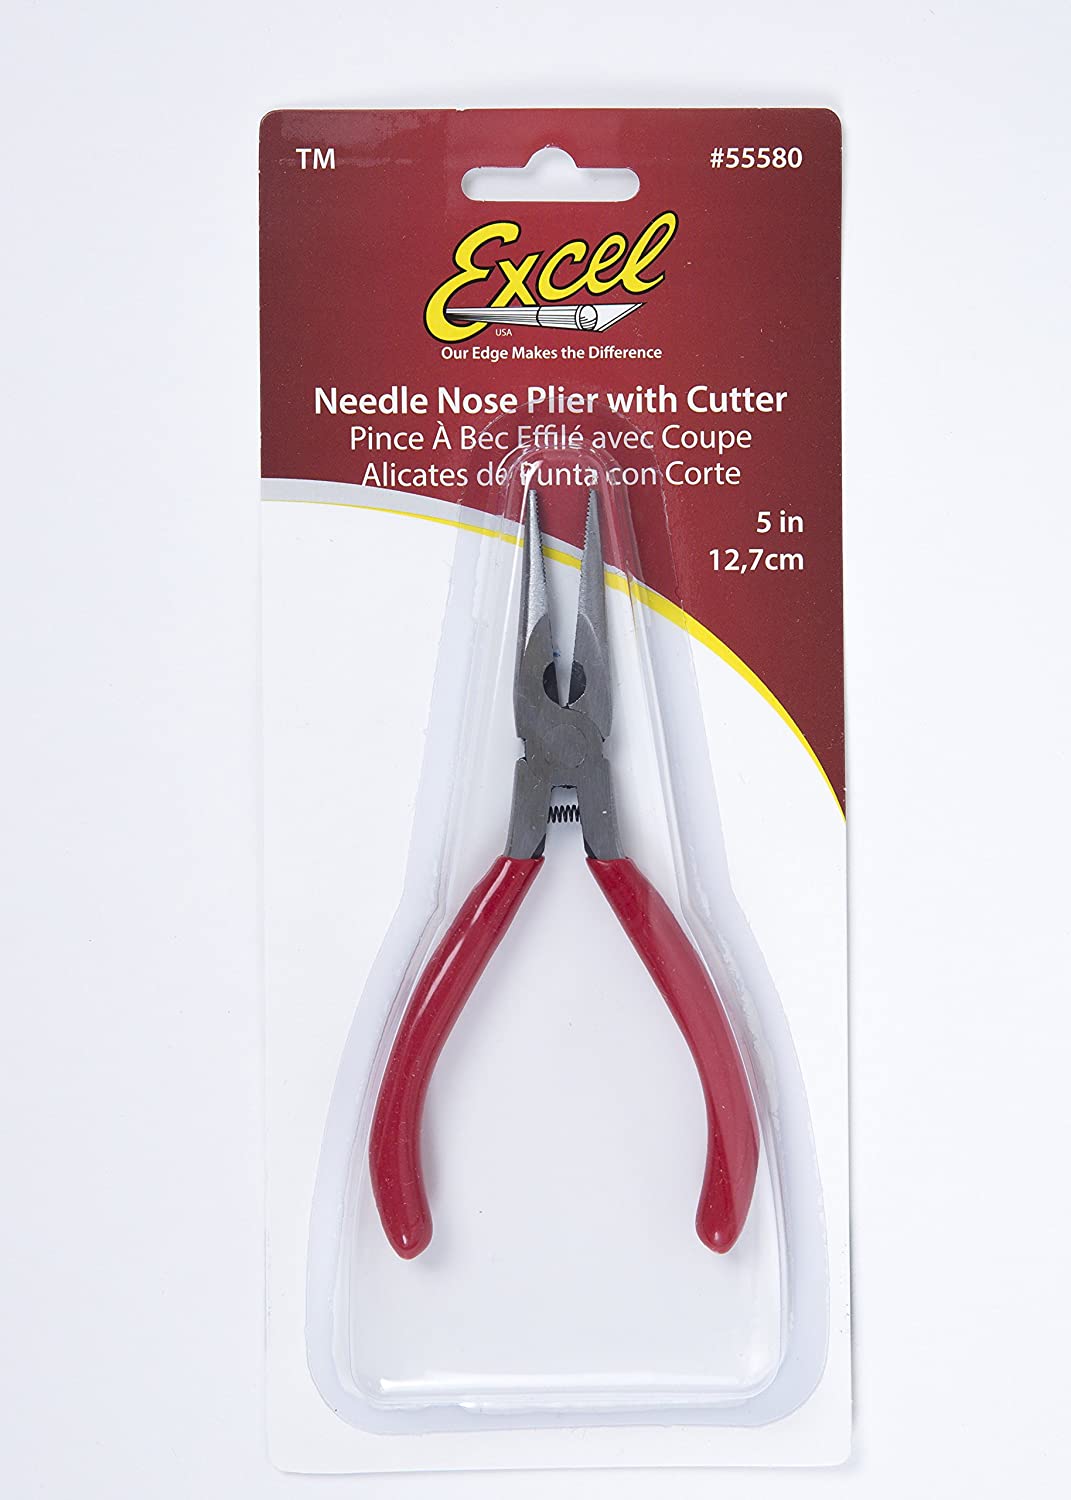 Needle Nose Plier with Cutter